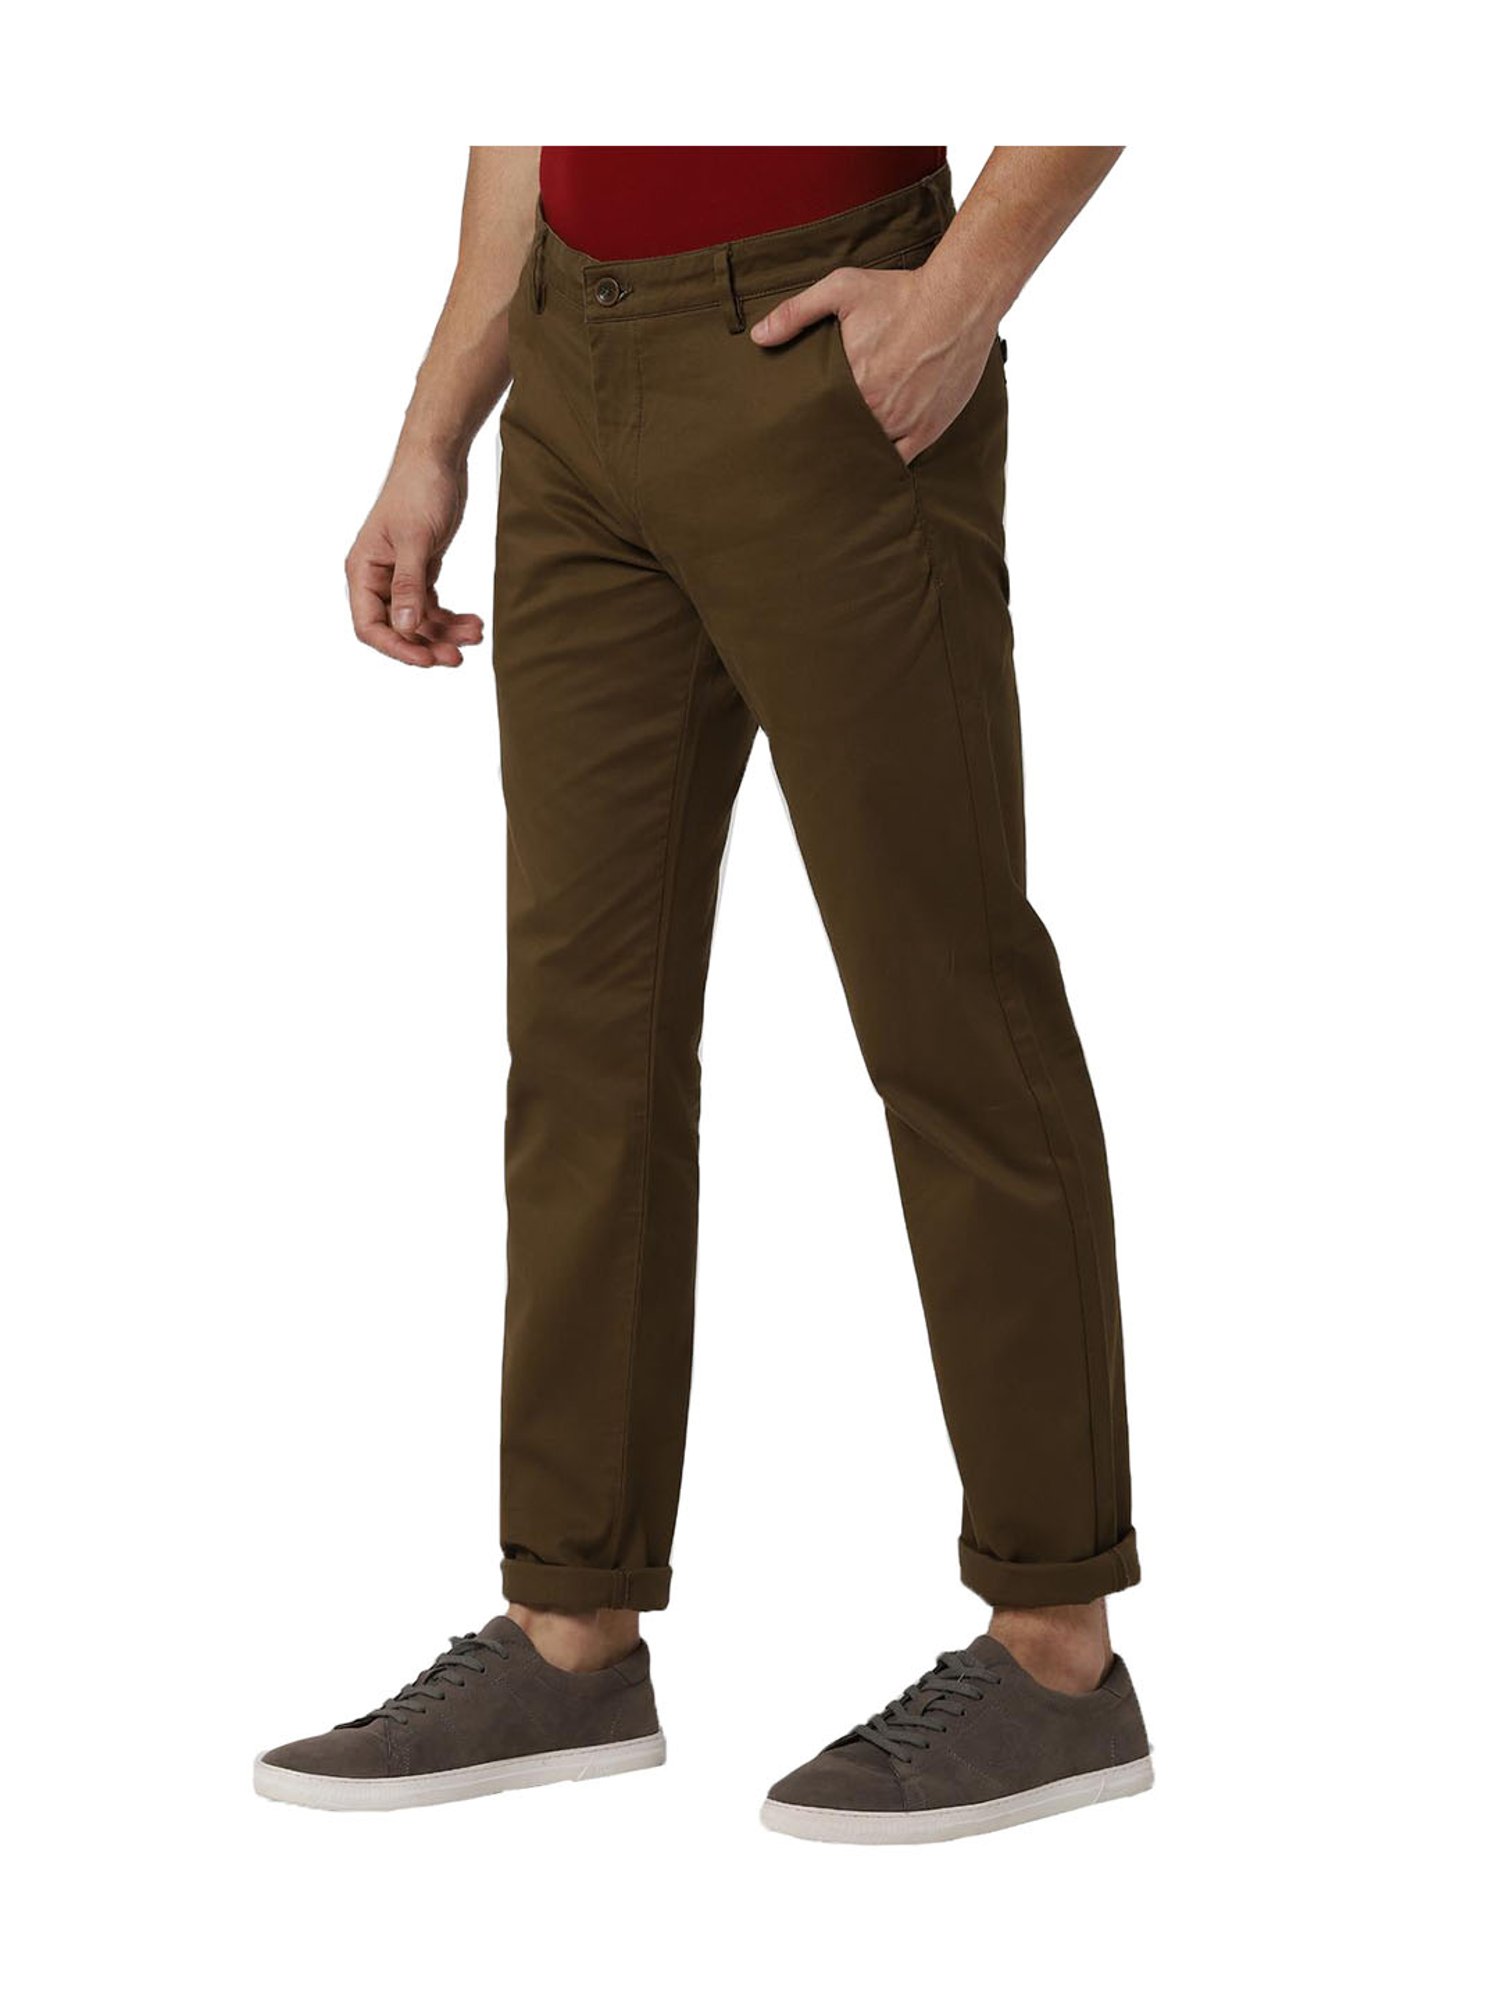 Buy Peter England Casuals Khaki Cotton Slim Fit Trousers for Mens Online   Tata CLiQ